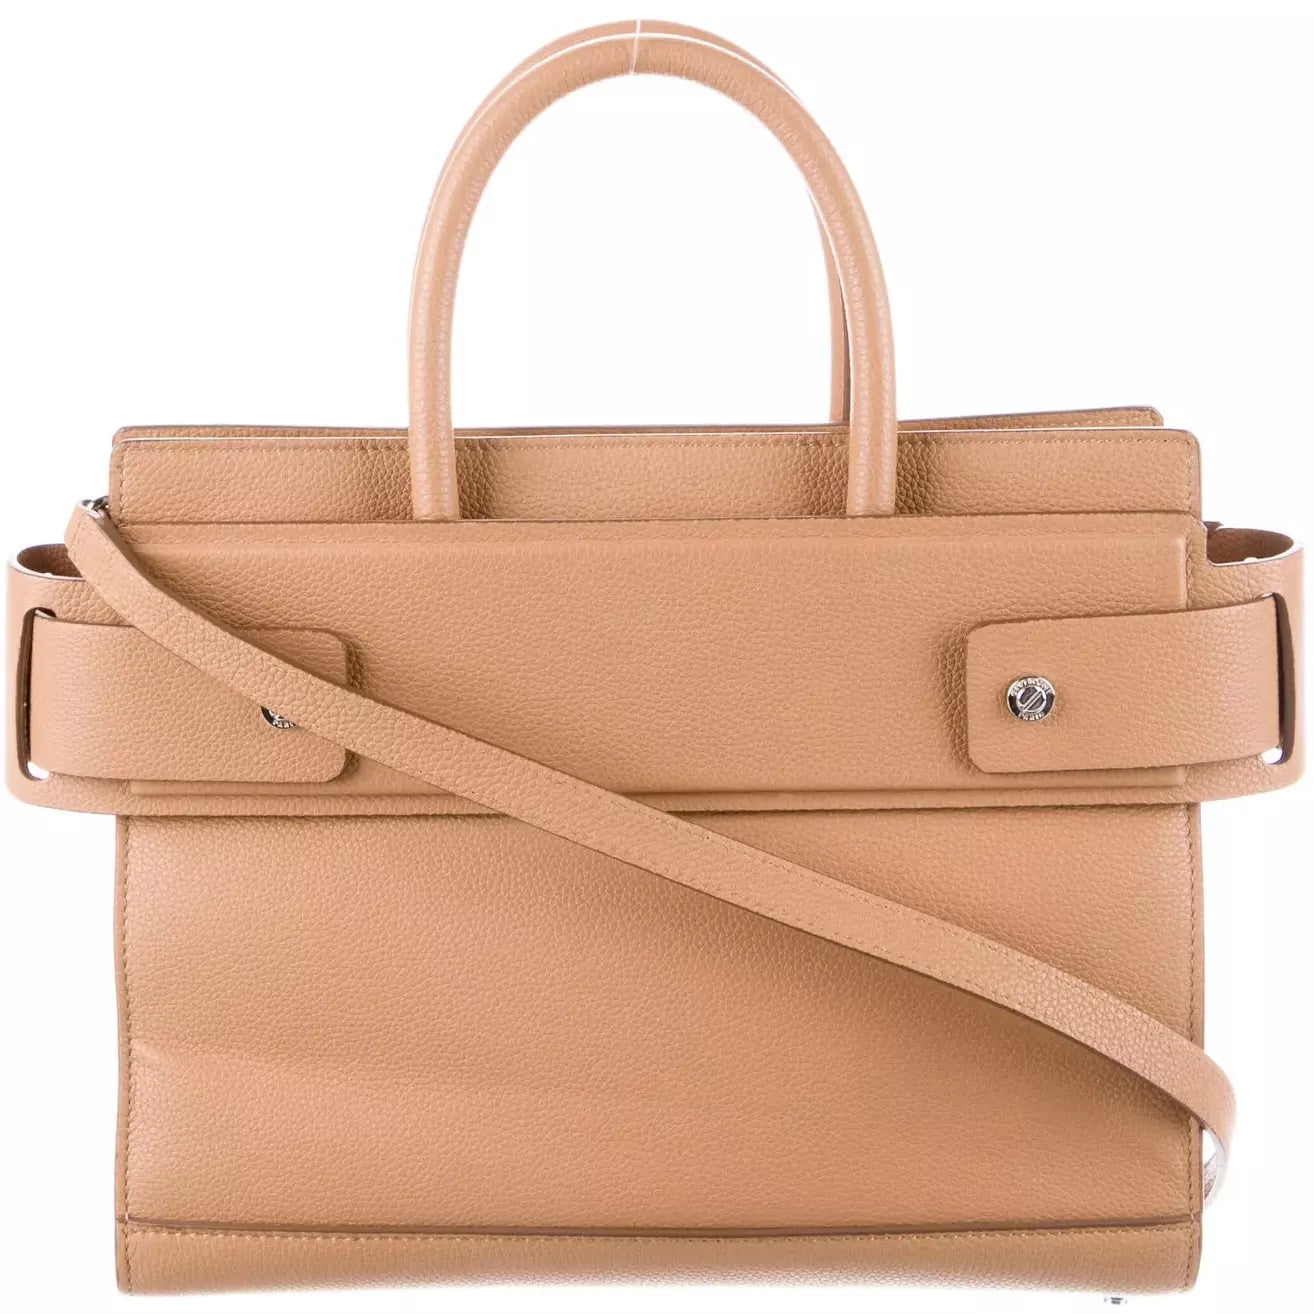 Givenchy Beige Leather Small Horizon Tote Bag